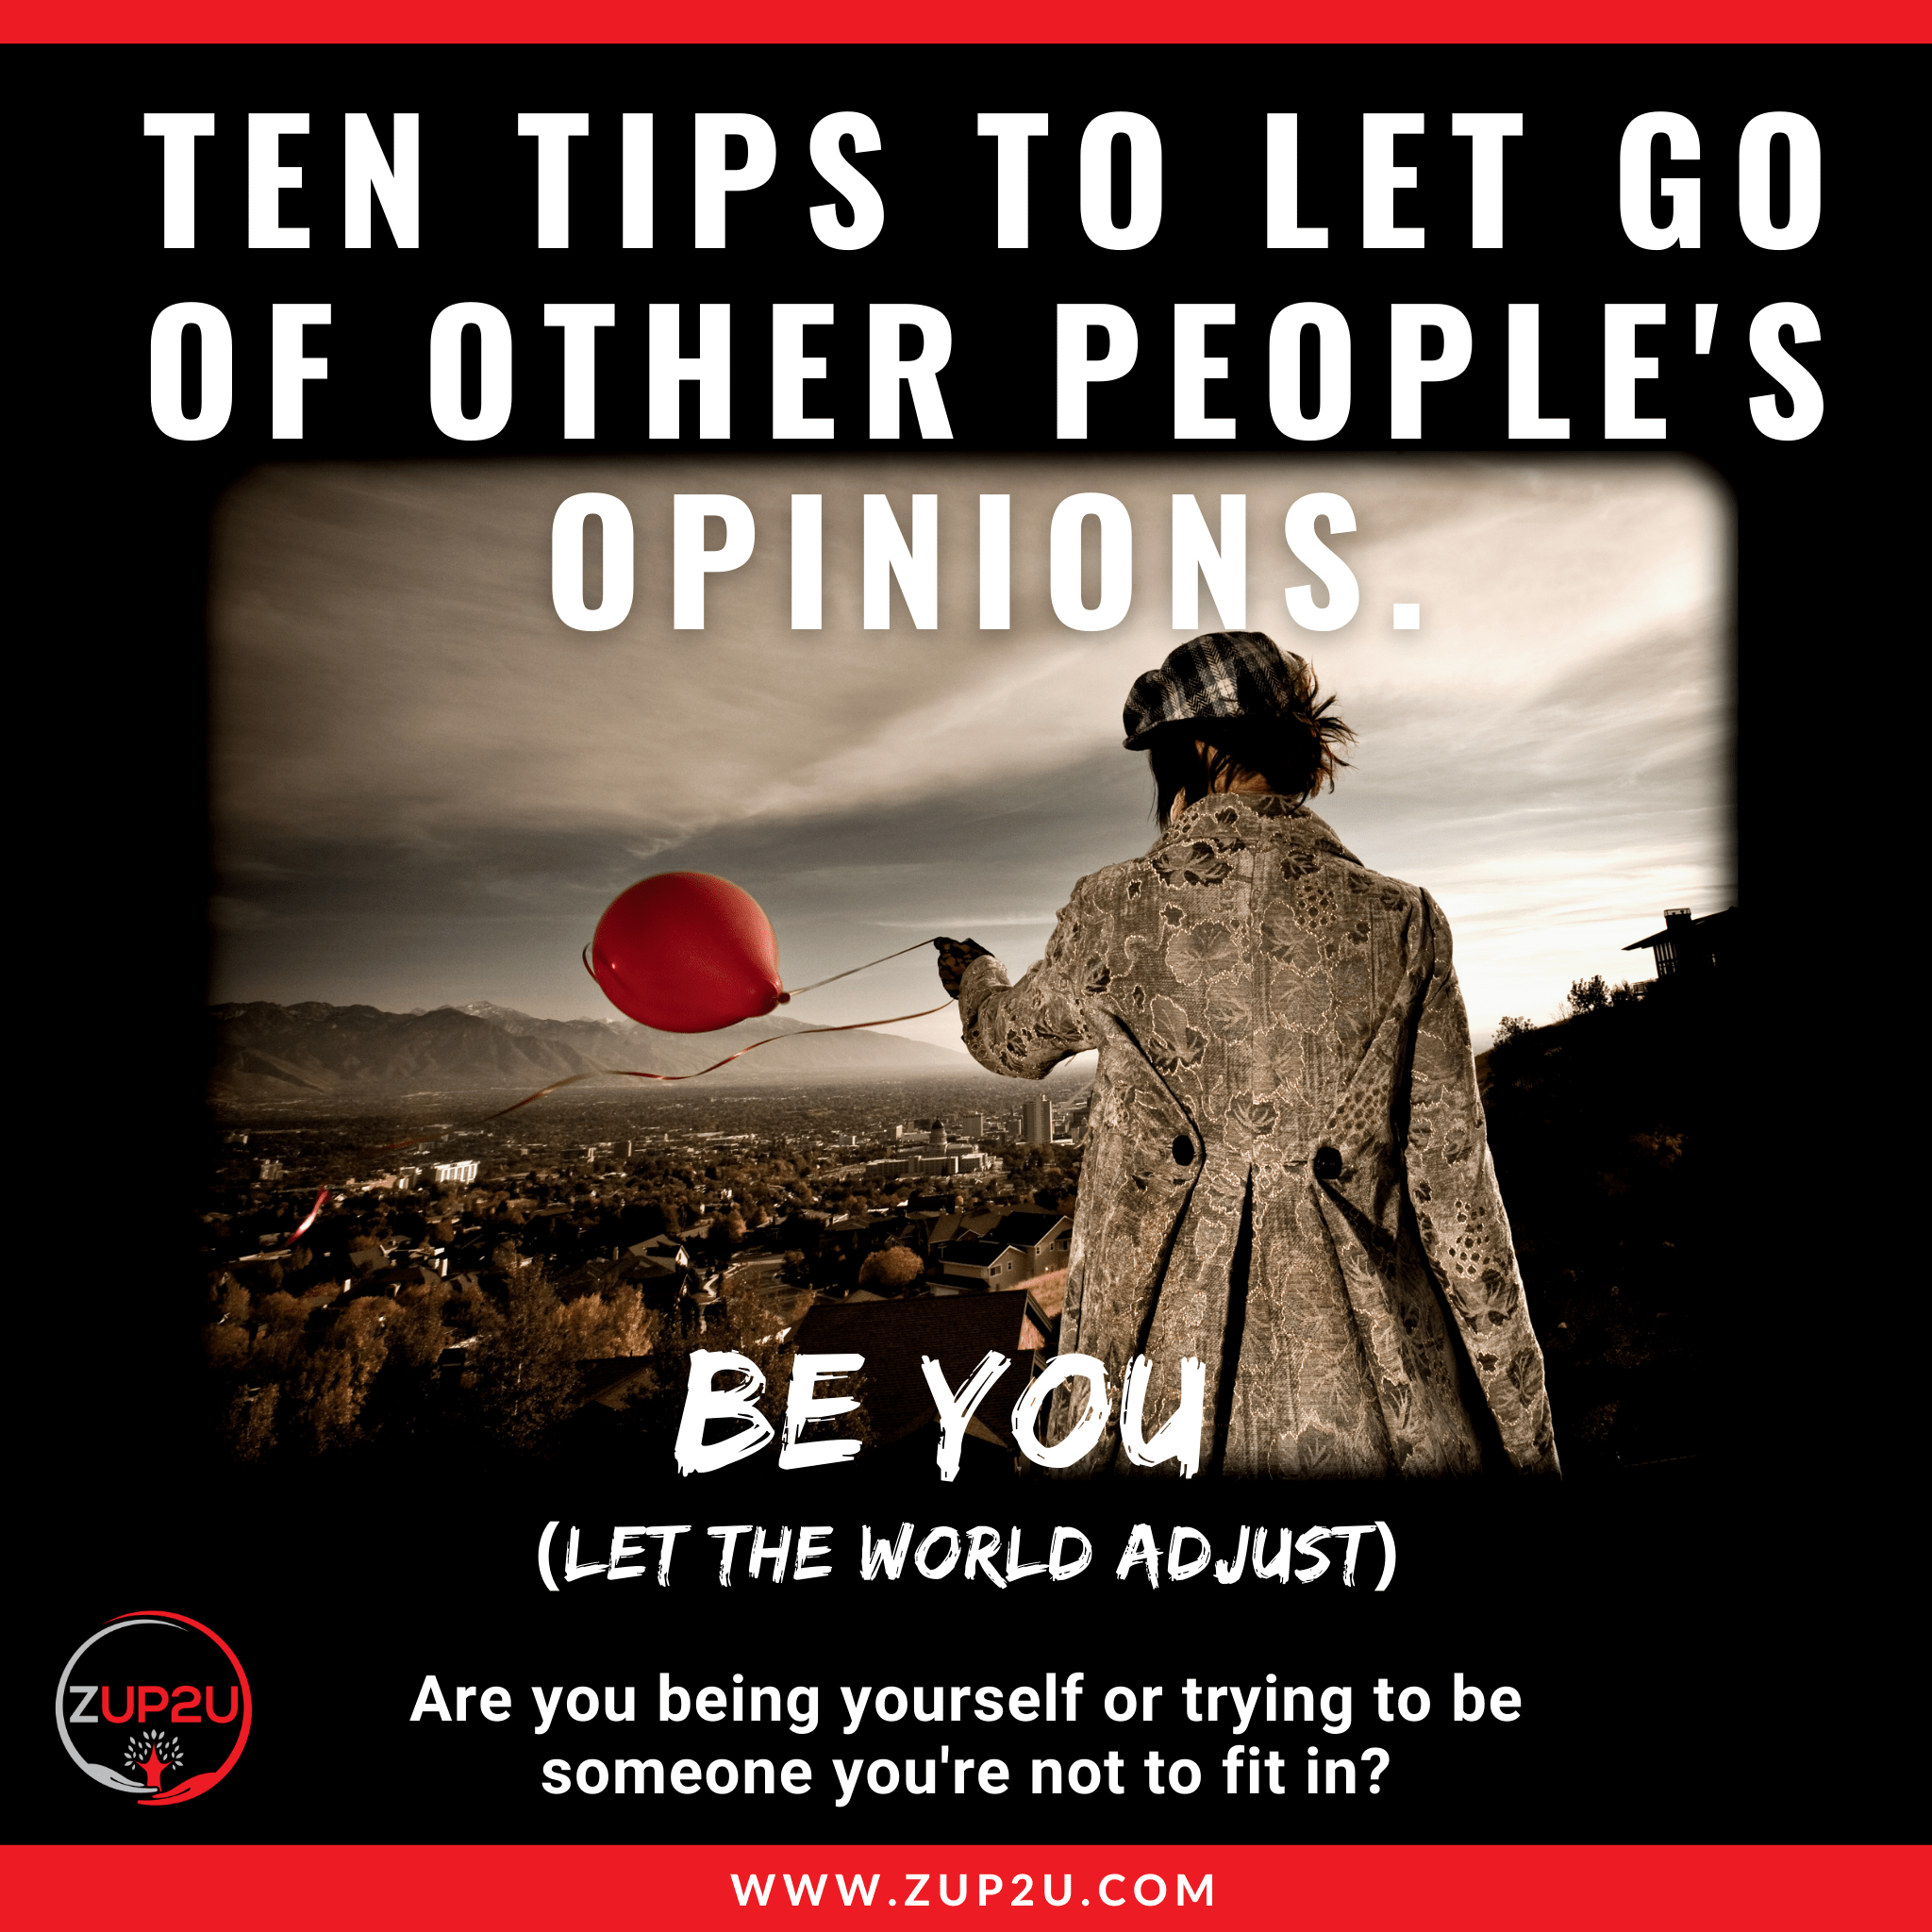 Ten tips to help you let go of other people's opinions.